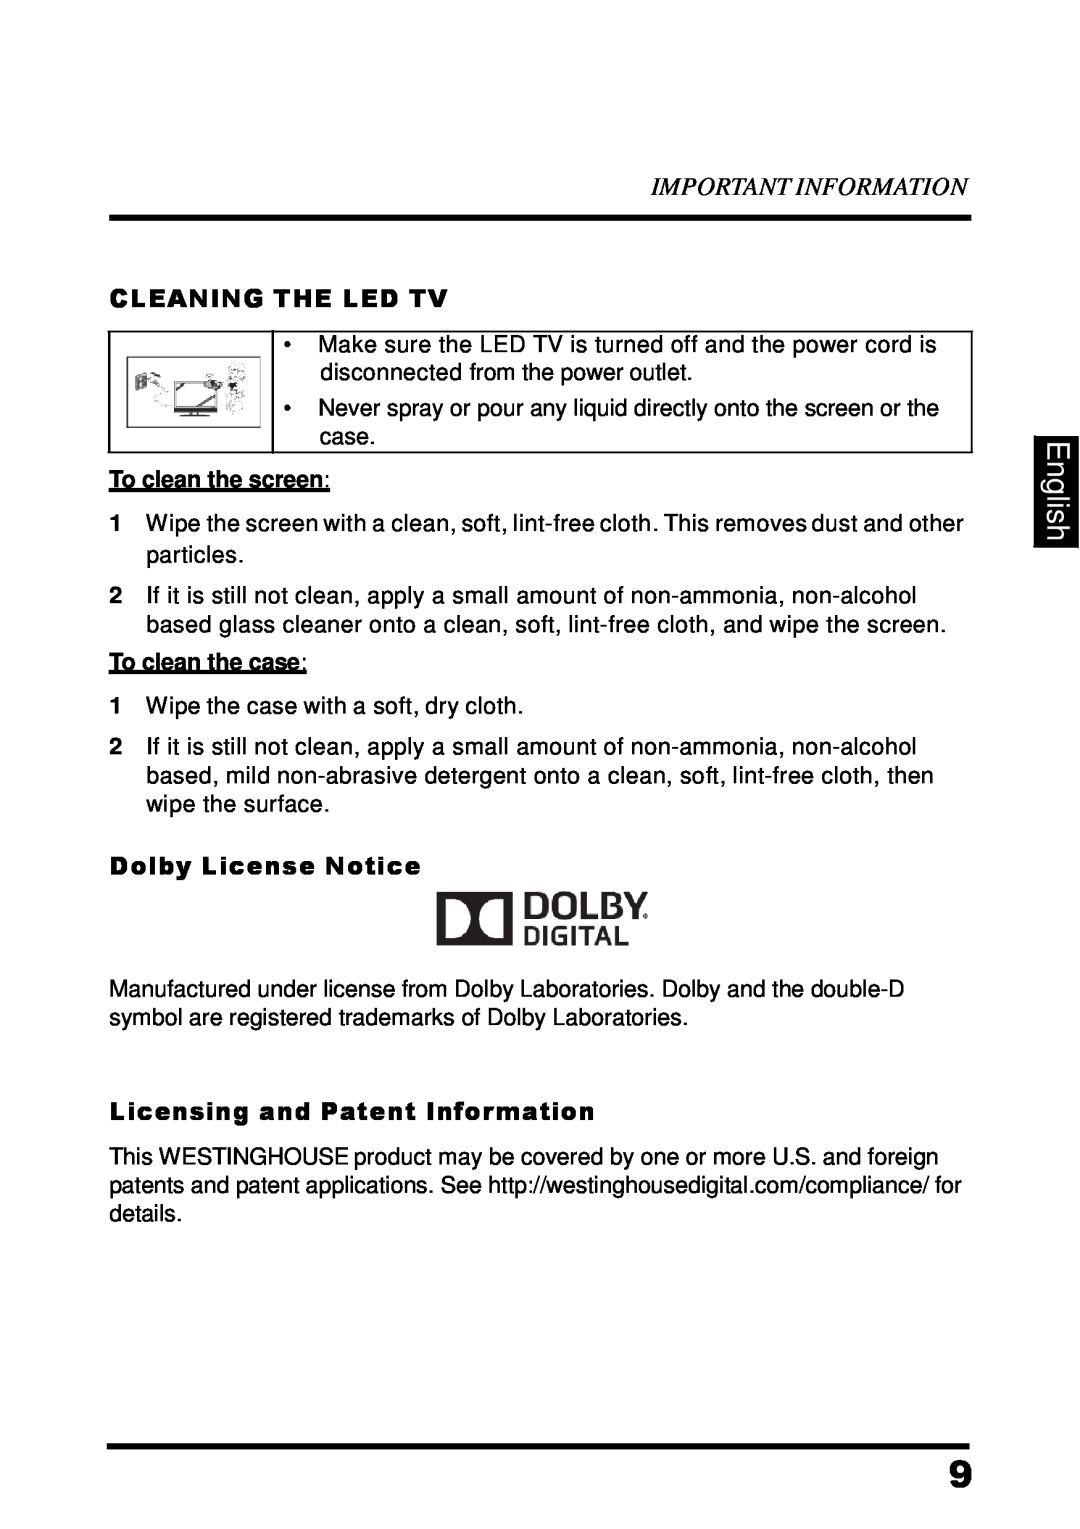 Westinghouse UW48T7HW manual English, Important Information, Cleaning The Led Tv, Dolby License Notice, To clean the screen 